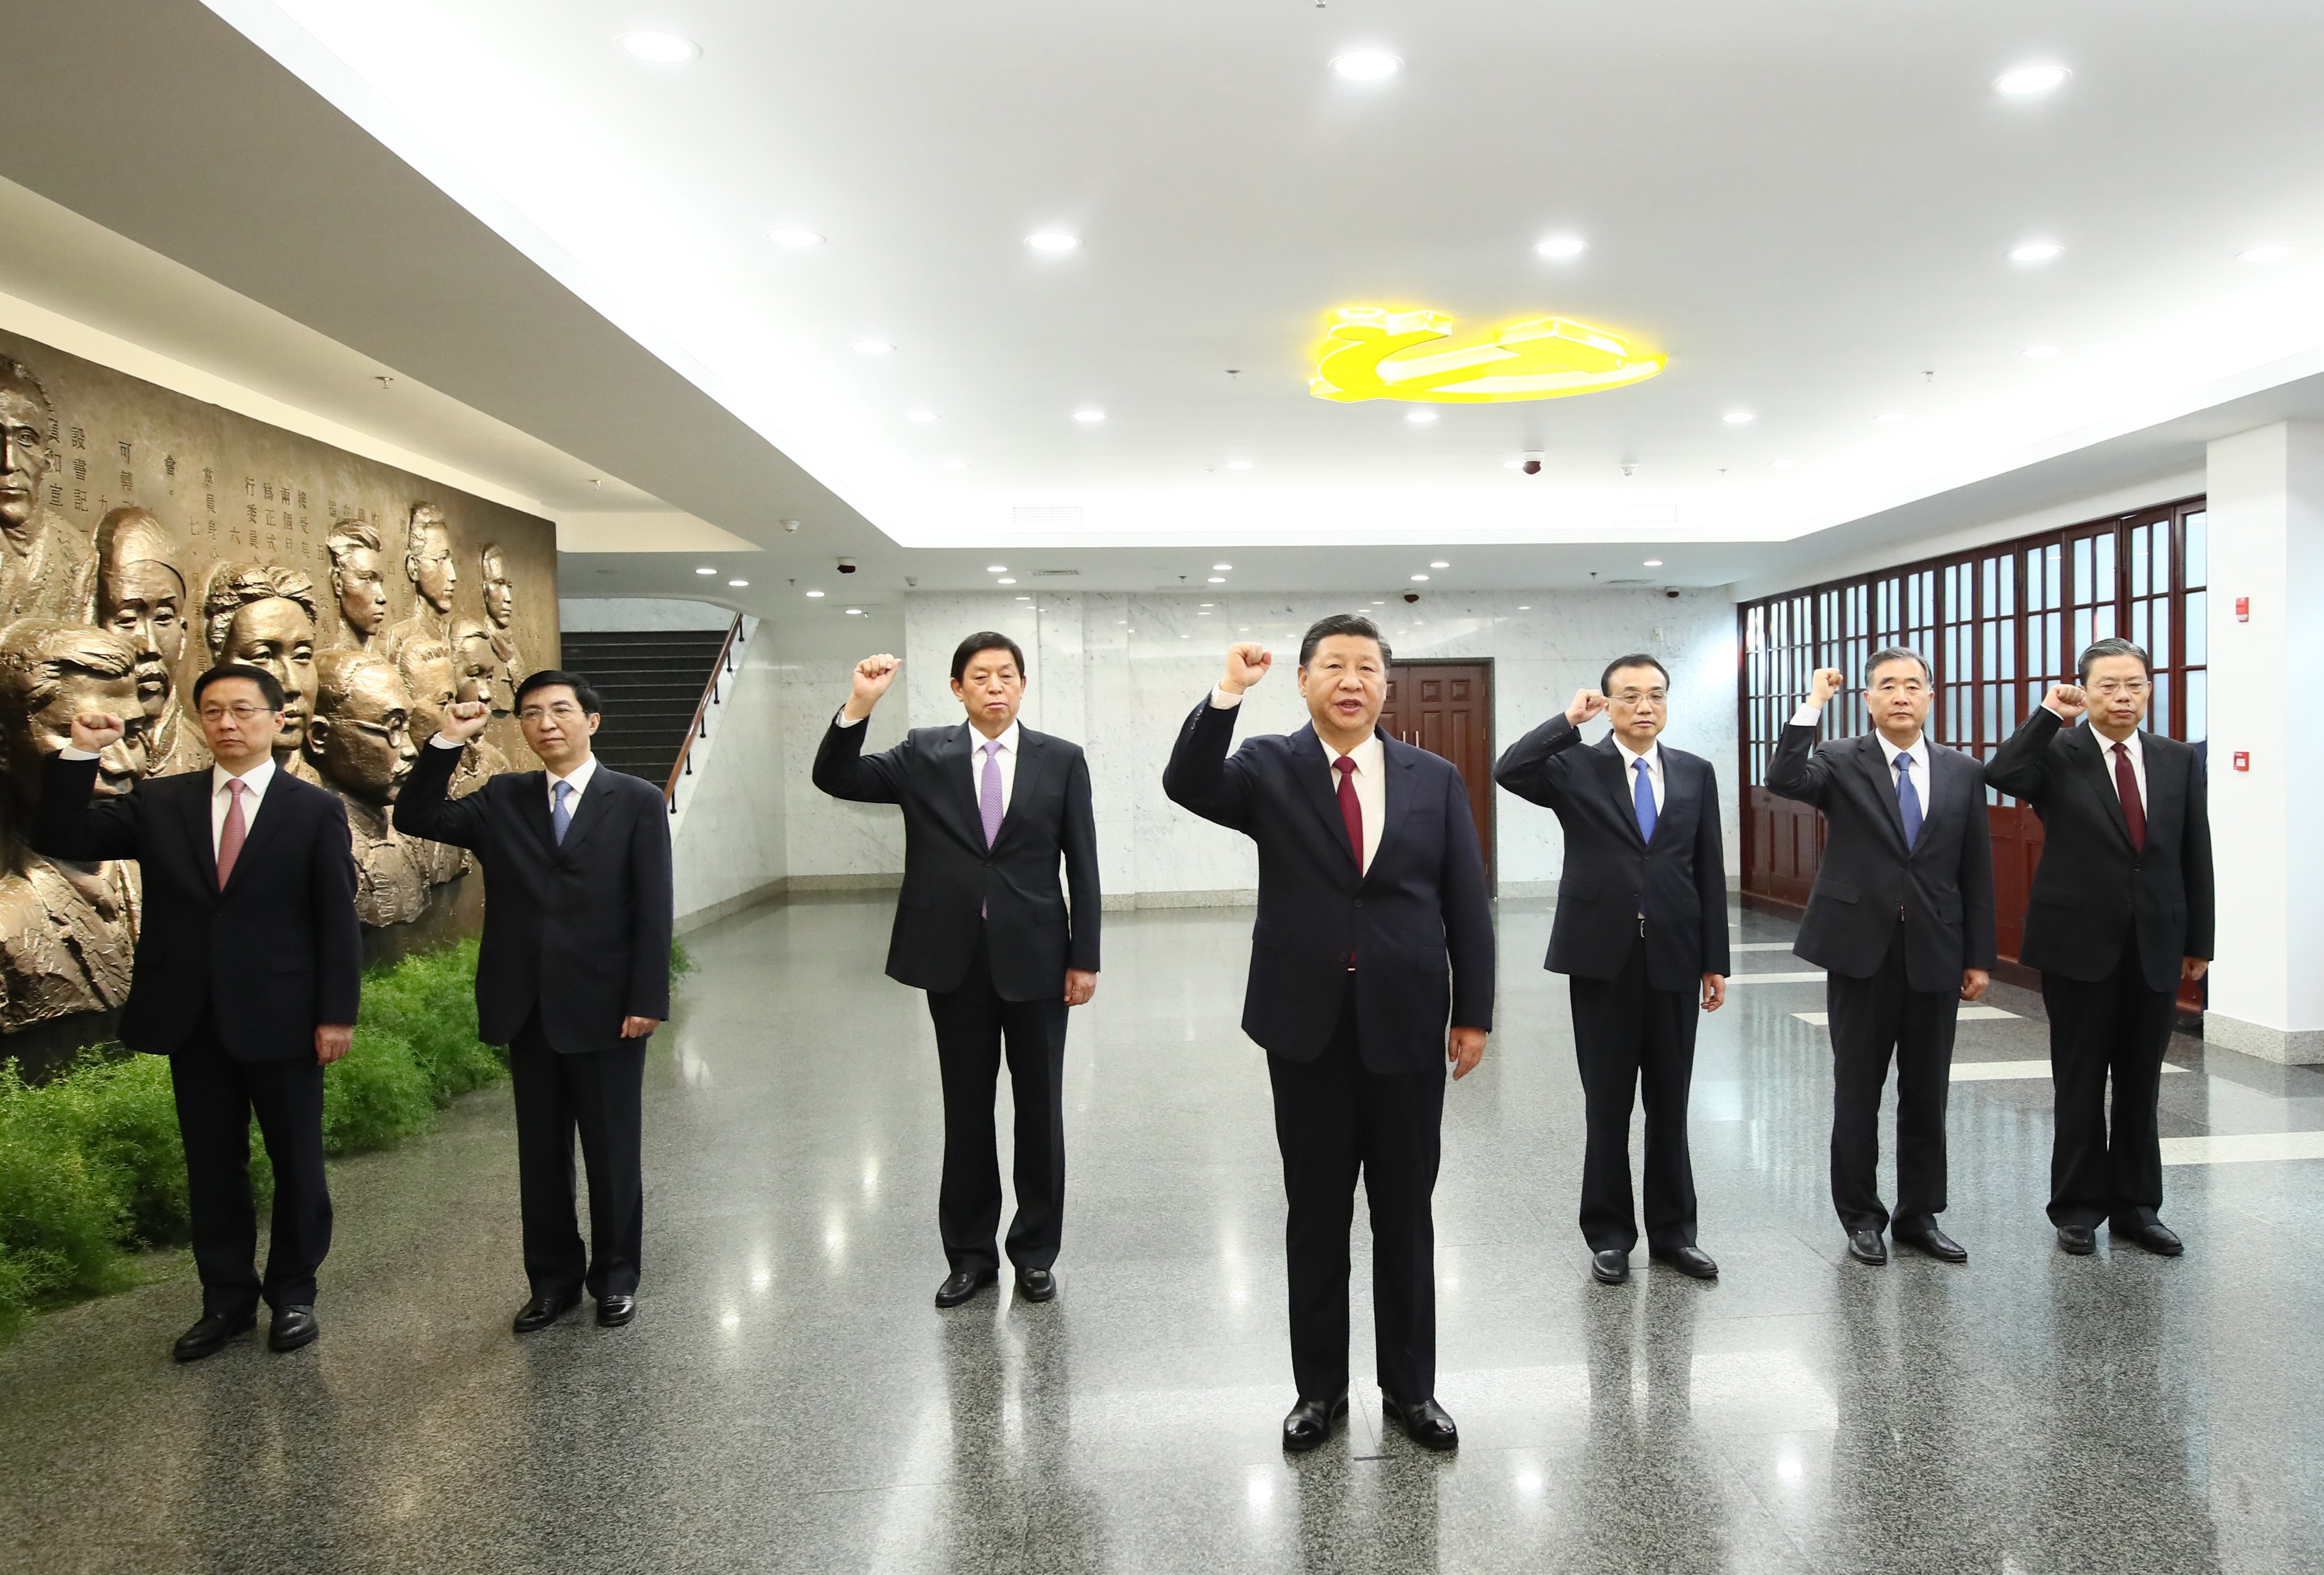 President Xi Jinping (centre) and his colleagues from the Politburo Standing Committee visit a memorial site where the Communist Party held its first national congress more than 96 years ago. Photo: Xinhua